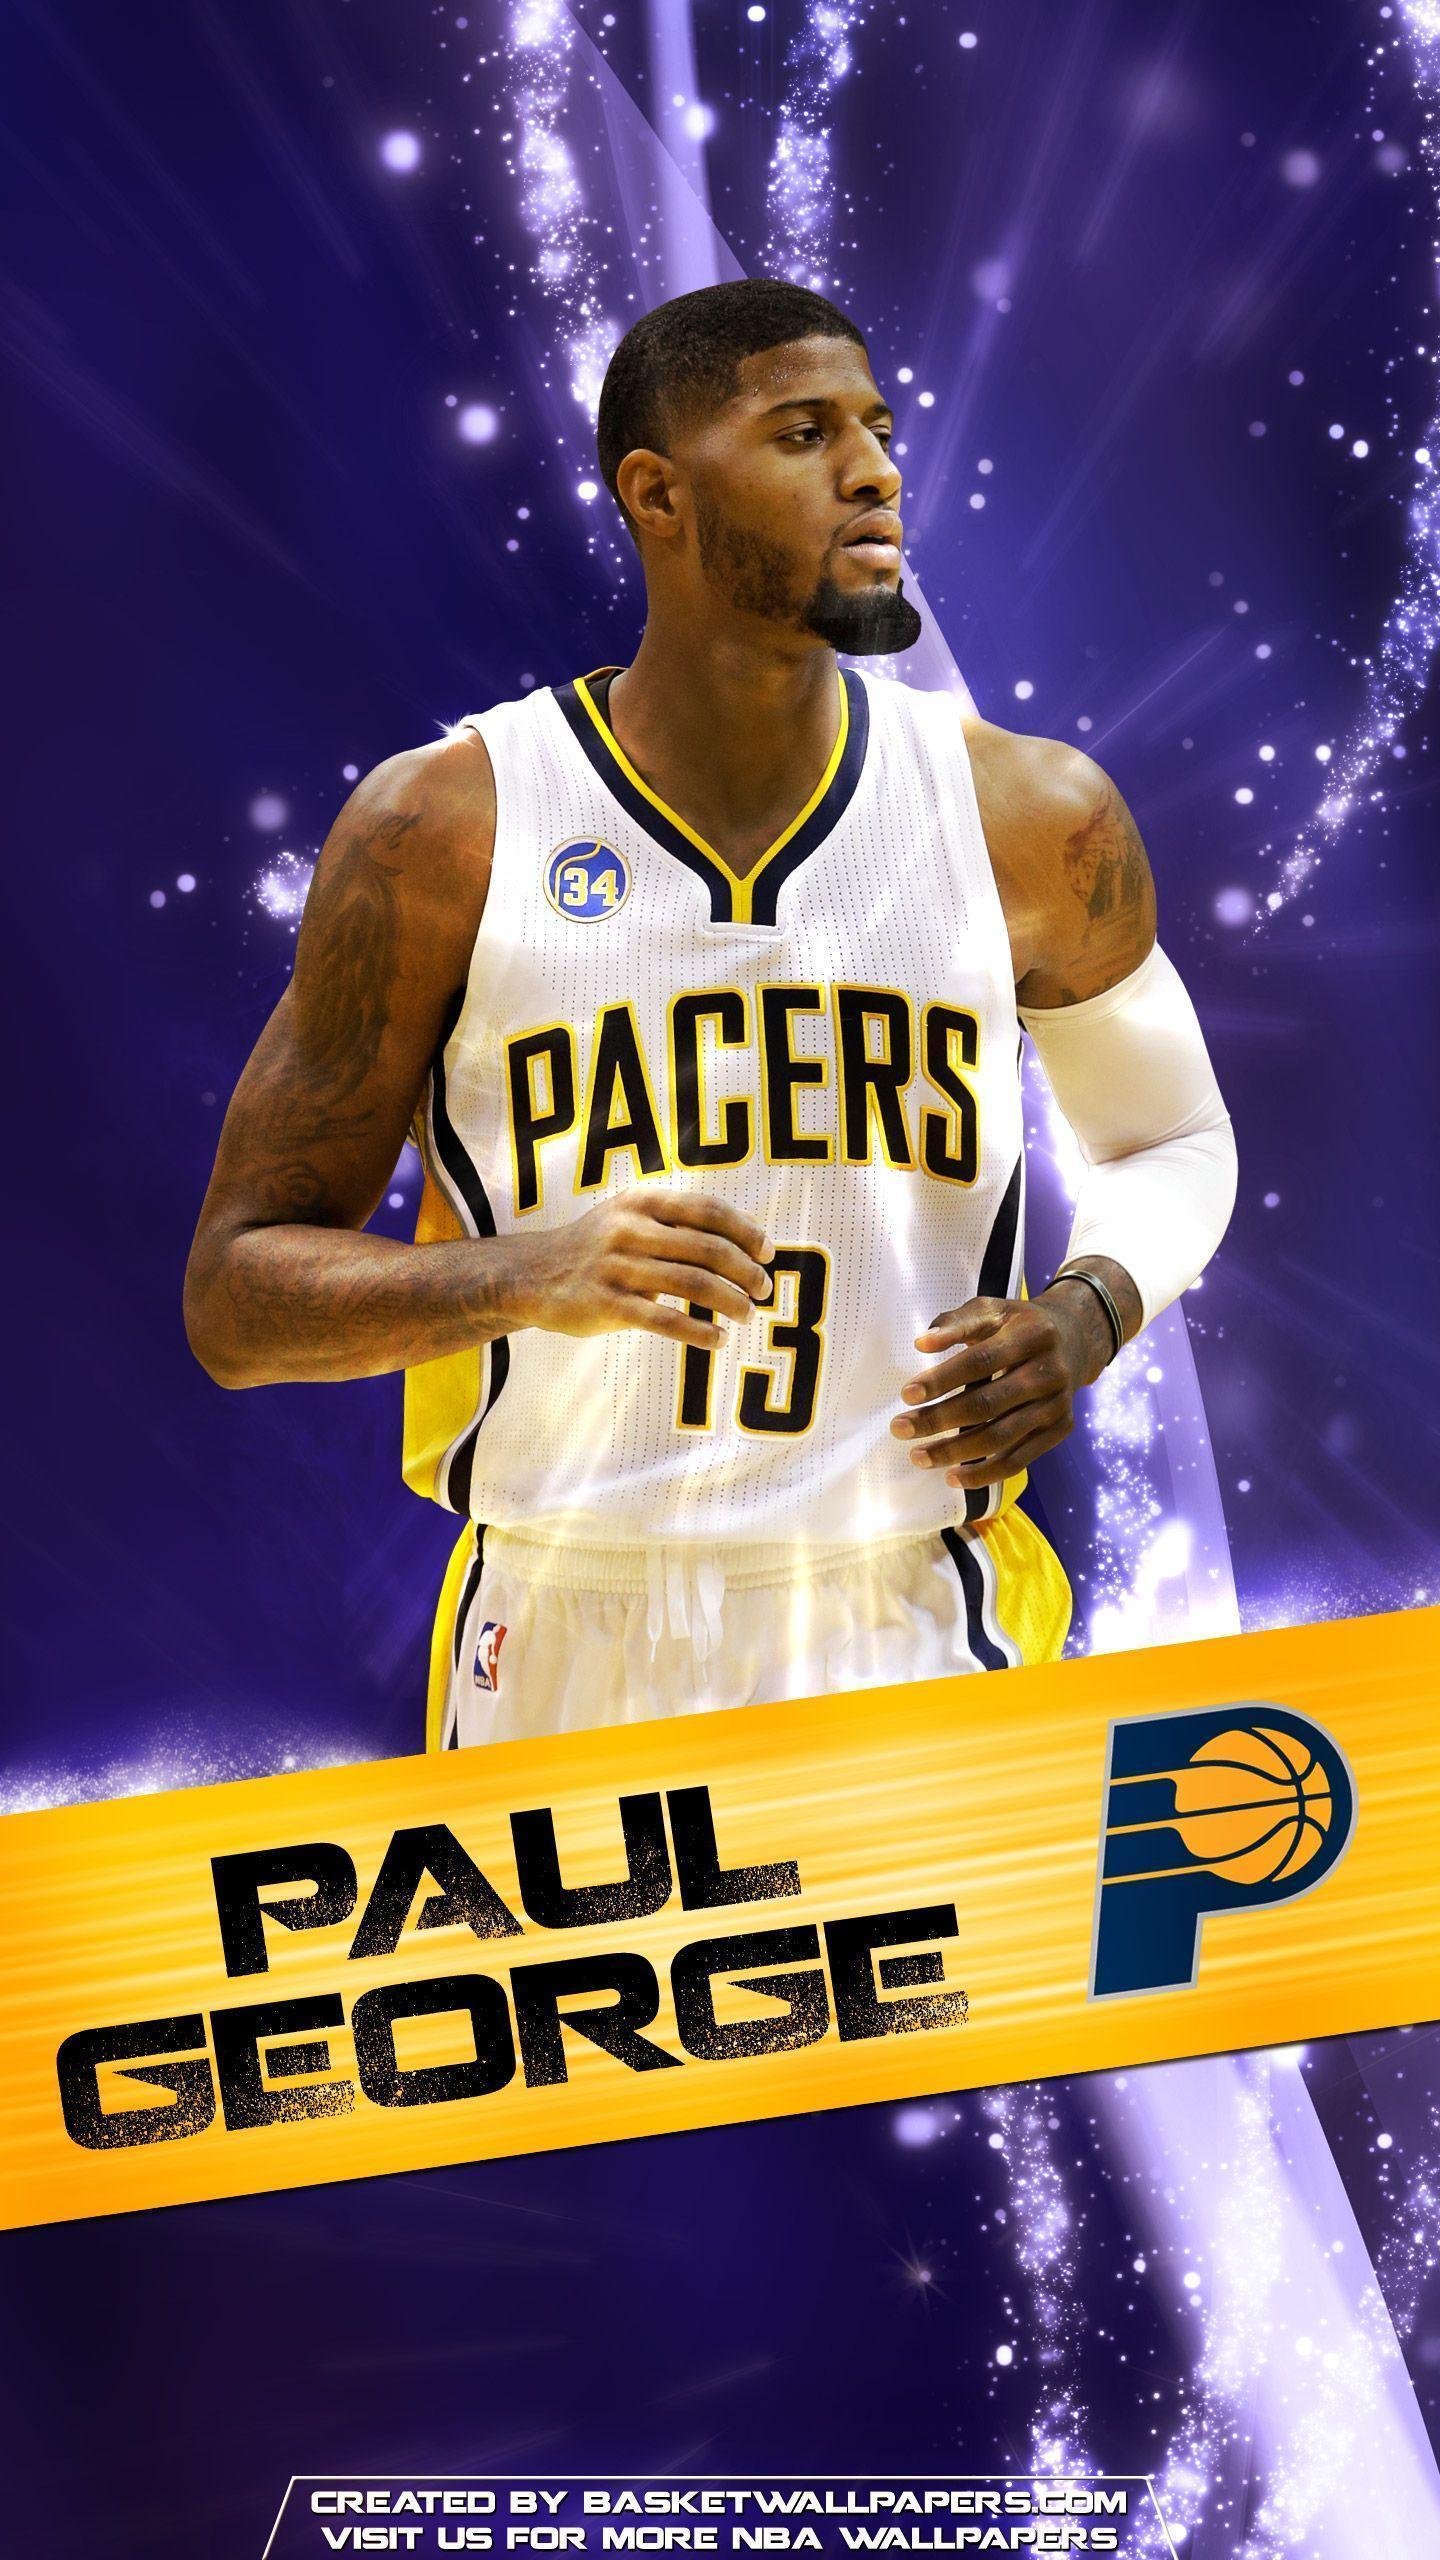 Paul George Indiana Pacers 2016 Mobile Wallpaper. Basketball